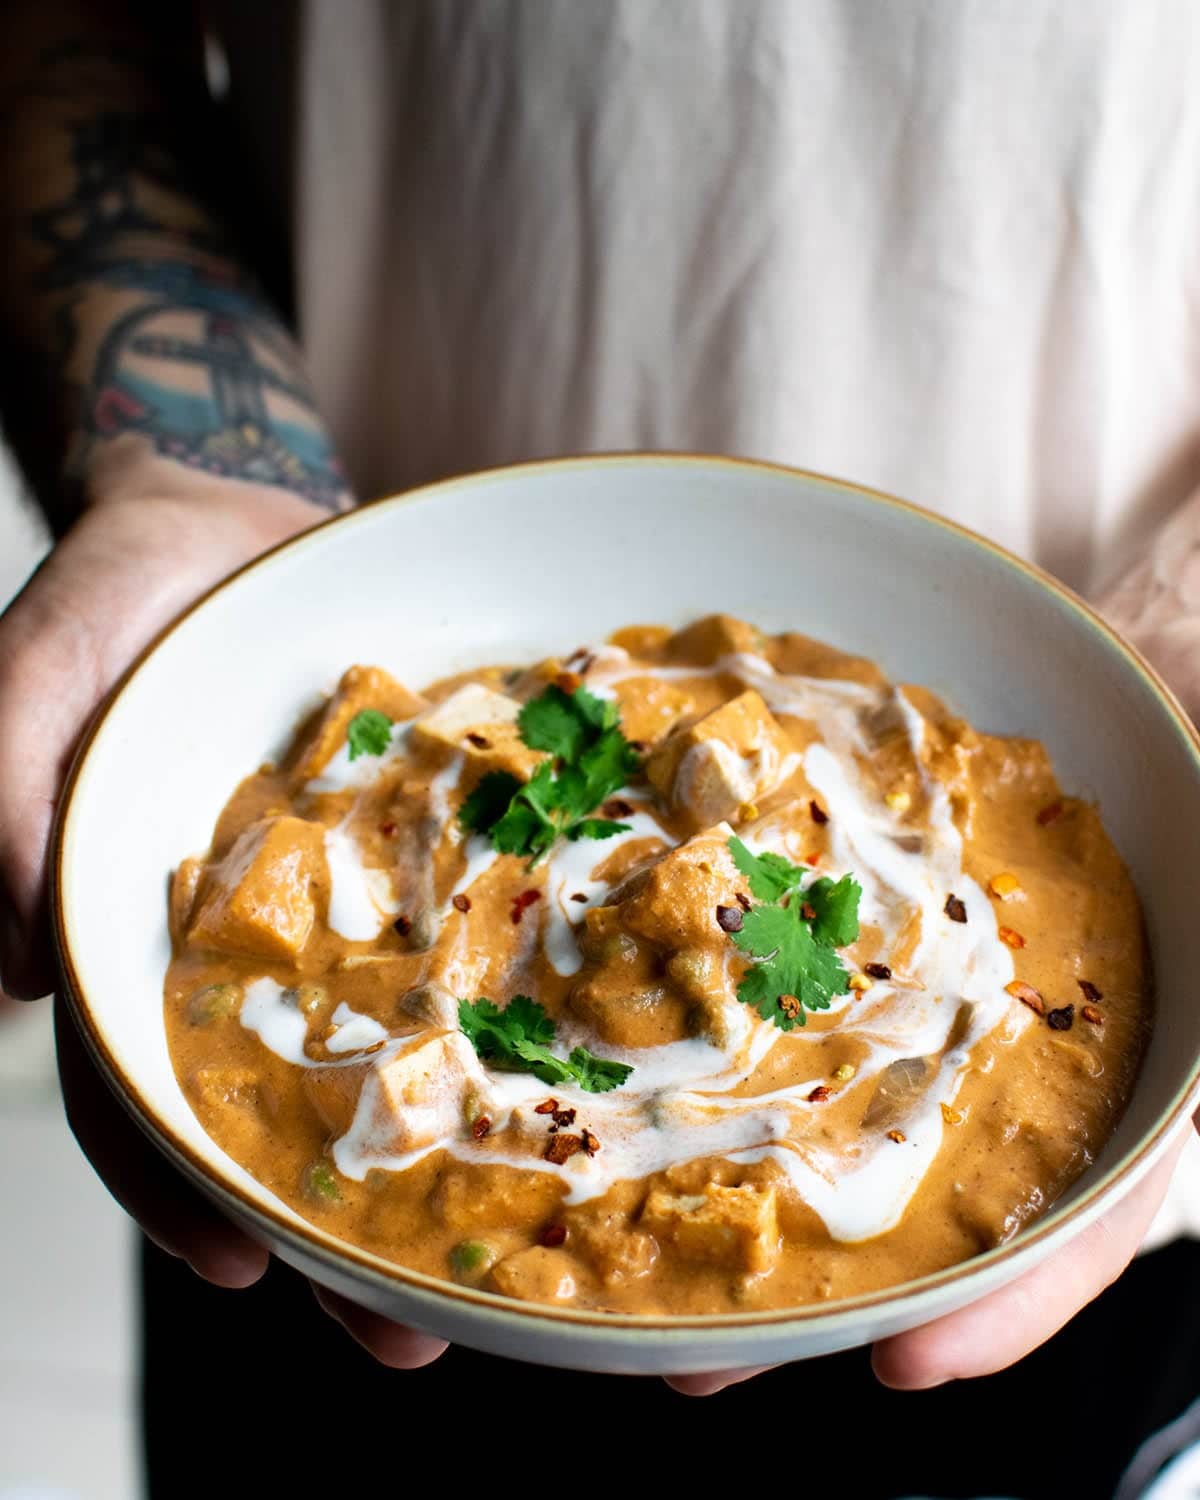 A man holding a bowl of vegan butter chicken, topped with fresh coriander